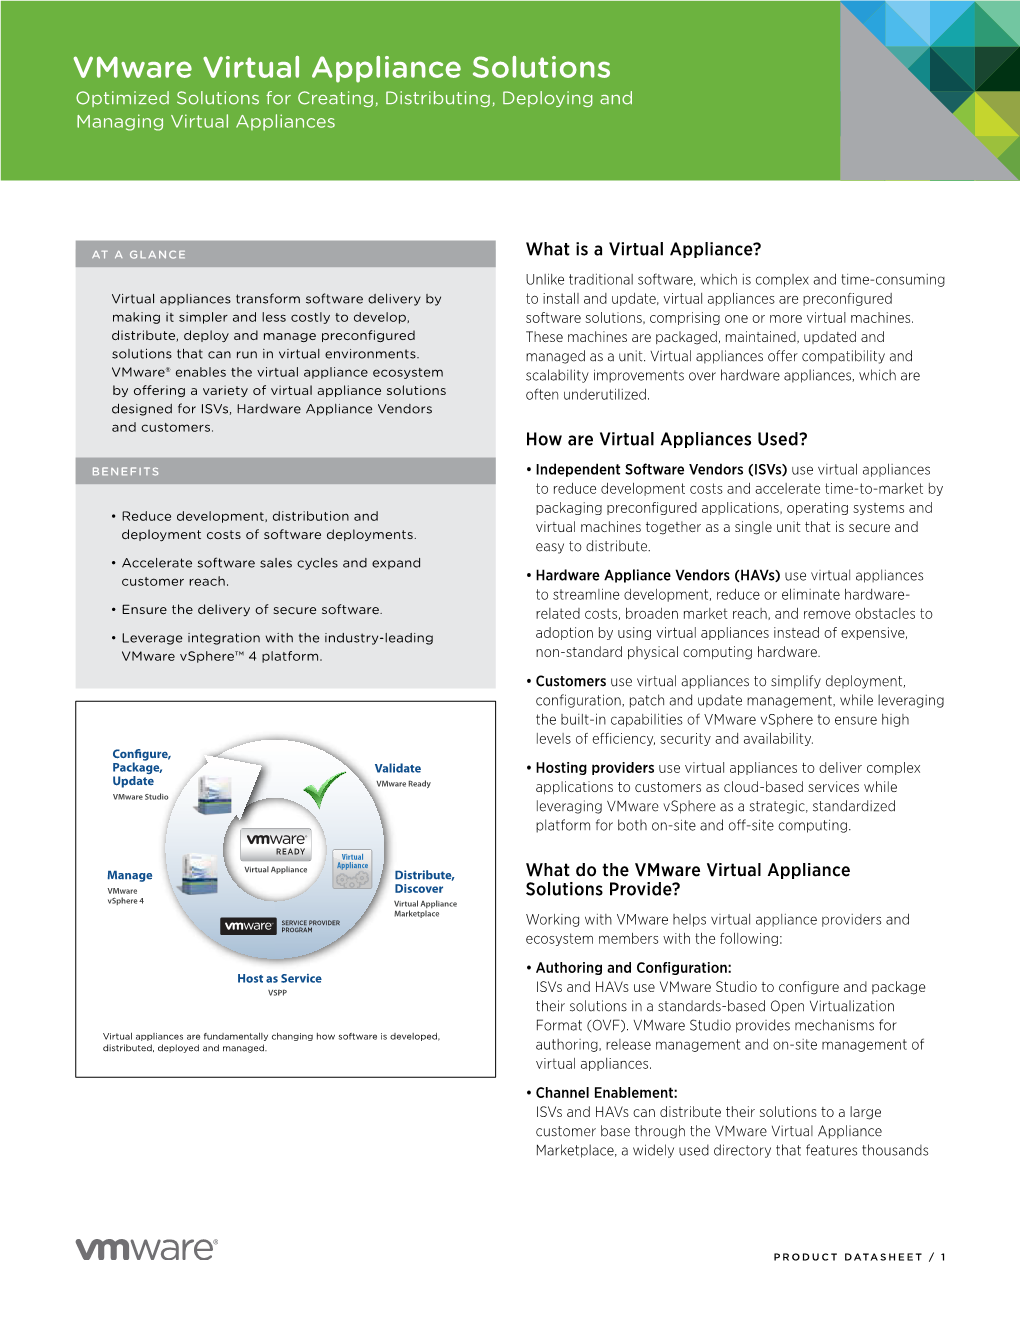 Vmware Virtual Appliance Solutions Optimized Solutions for Creating, Distributing, Deploying and Managing Virtual Appliances